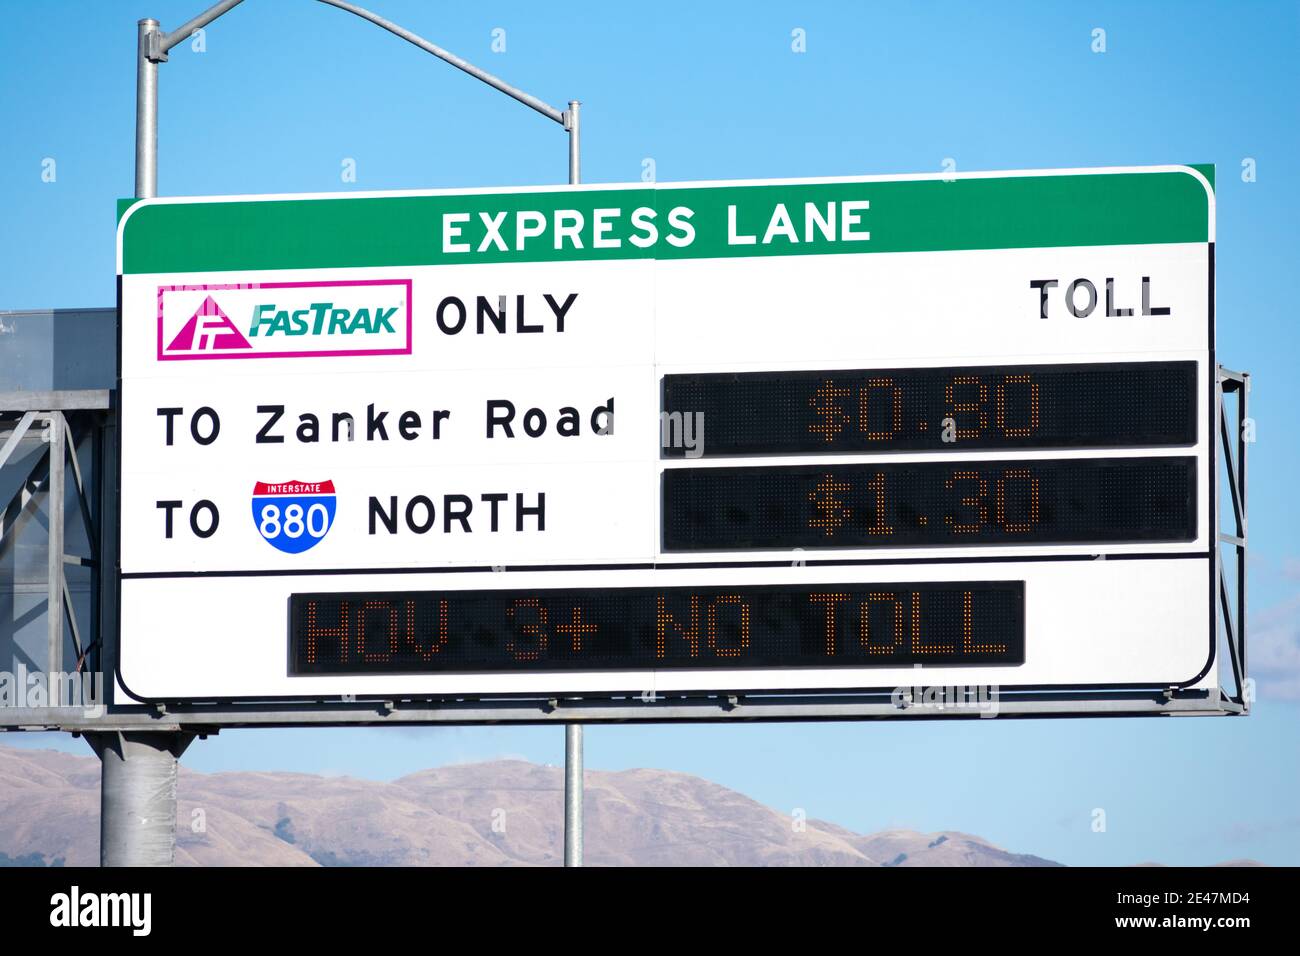 FasTrak express lane sign. FasTrak is an electronic toll collection ETC system on toll roads, bridges, and high-occupancy toll lanes in California - S Stock Photo